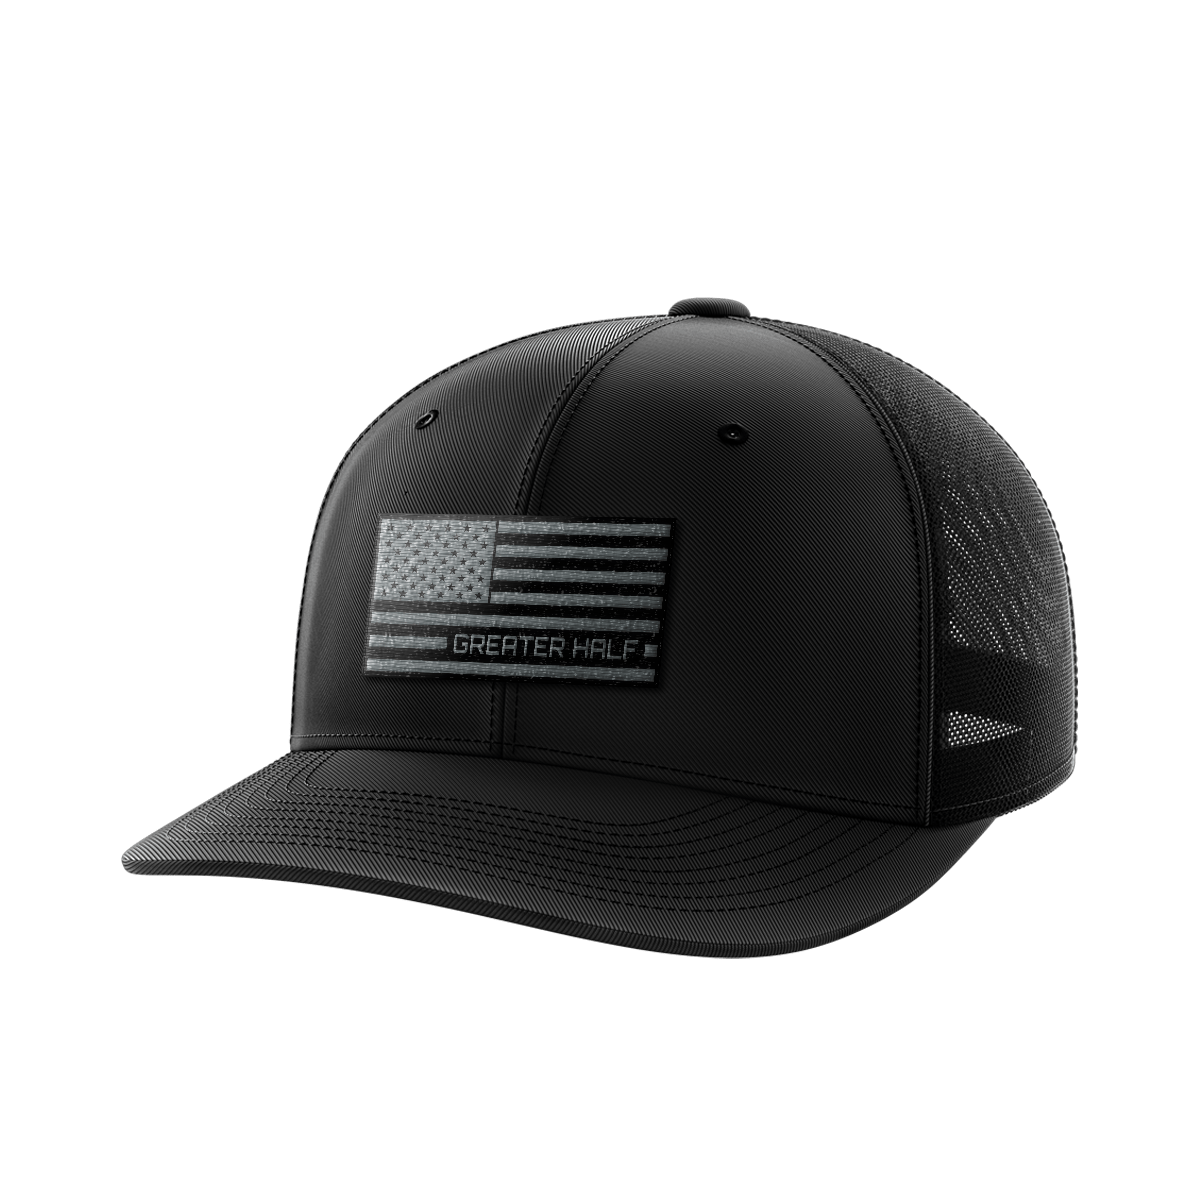 USA Black Flag Woven Patch Hat - Greater Half